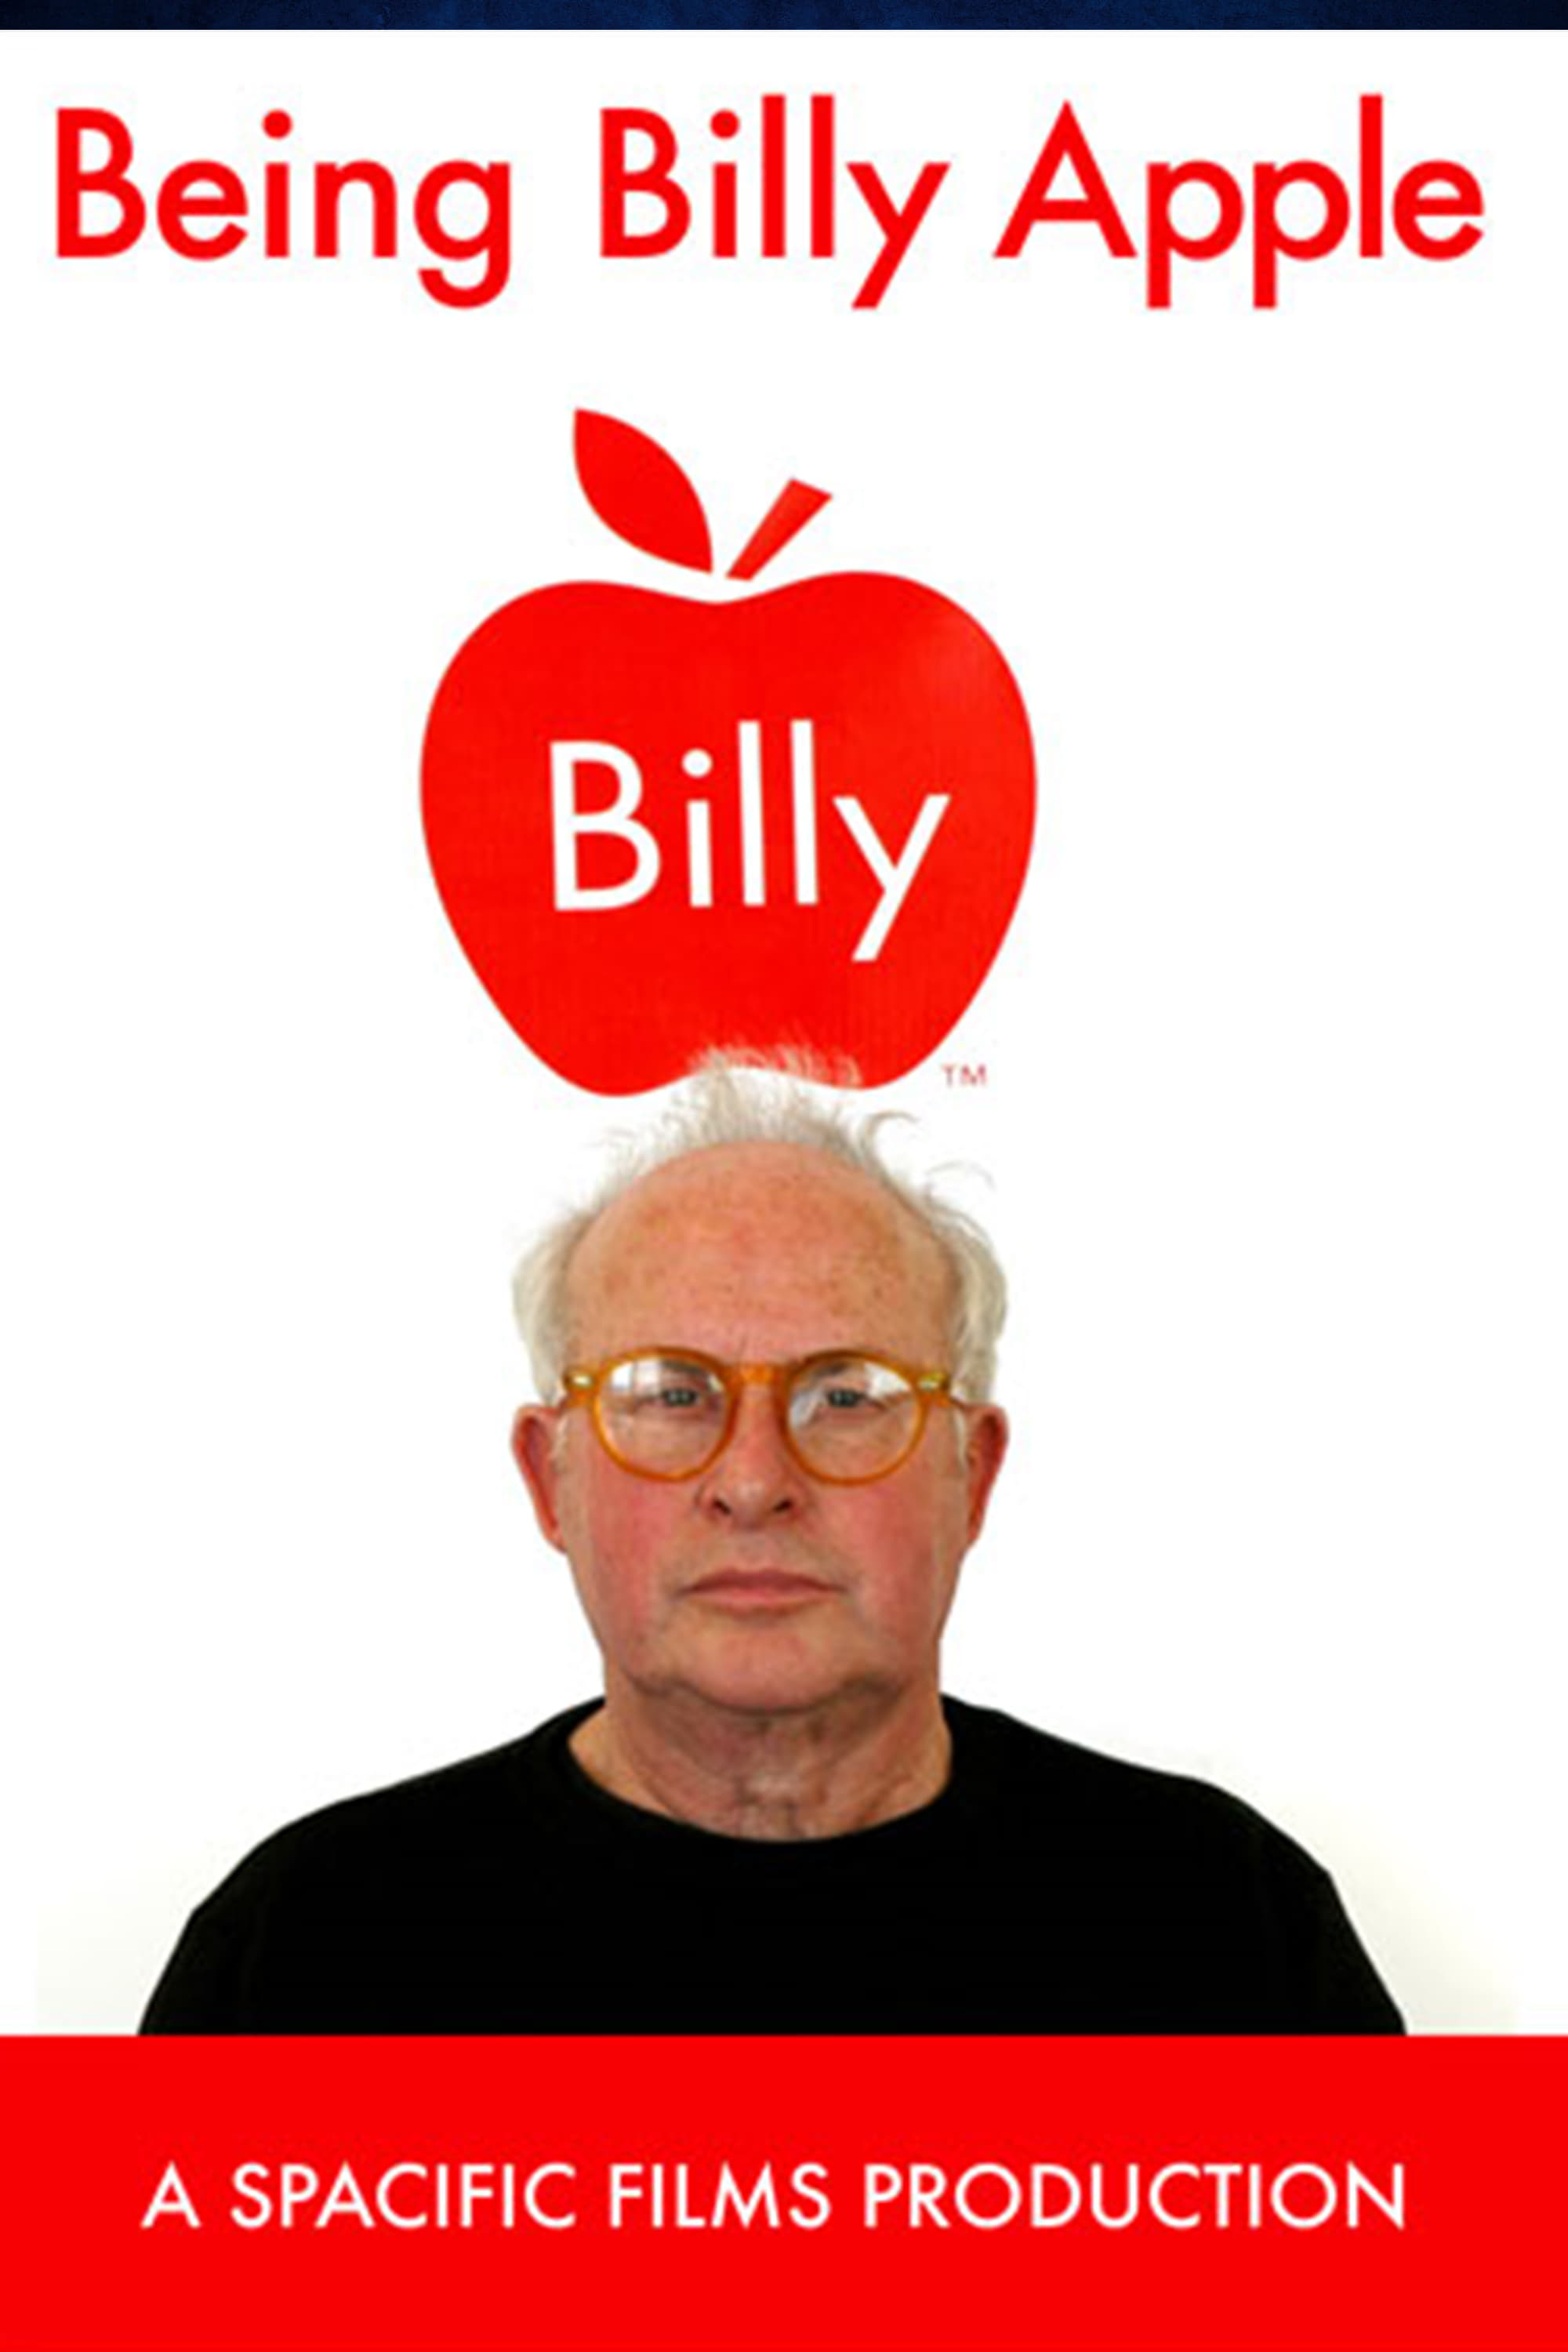 Being Billy Apple